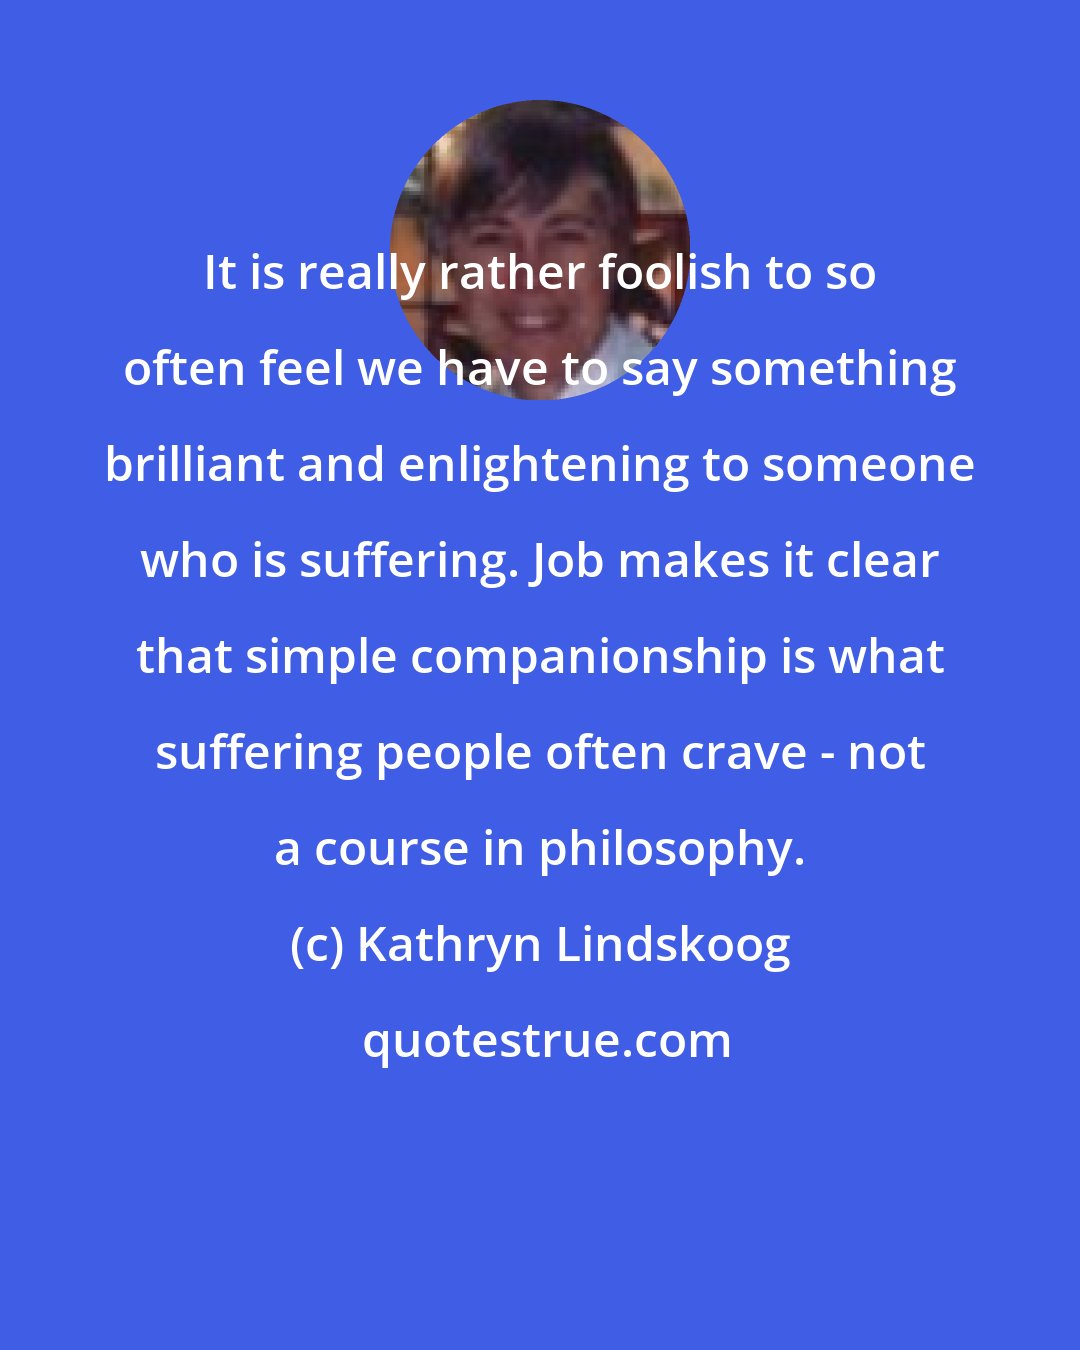 Kathryn Lindskoog: It is really rather foolish to so often feel we have to say something brilliant and enlightening to someone who is suffering. Job makes it clear that simple companionship is what suffering people often crave - not a course in philosophy.